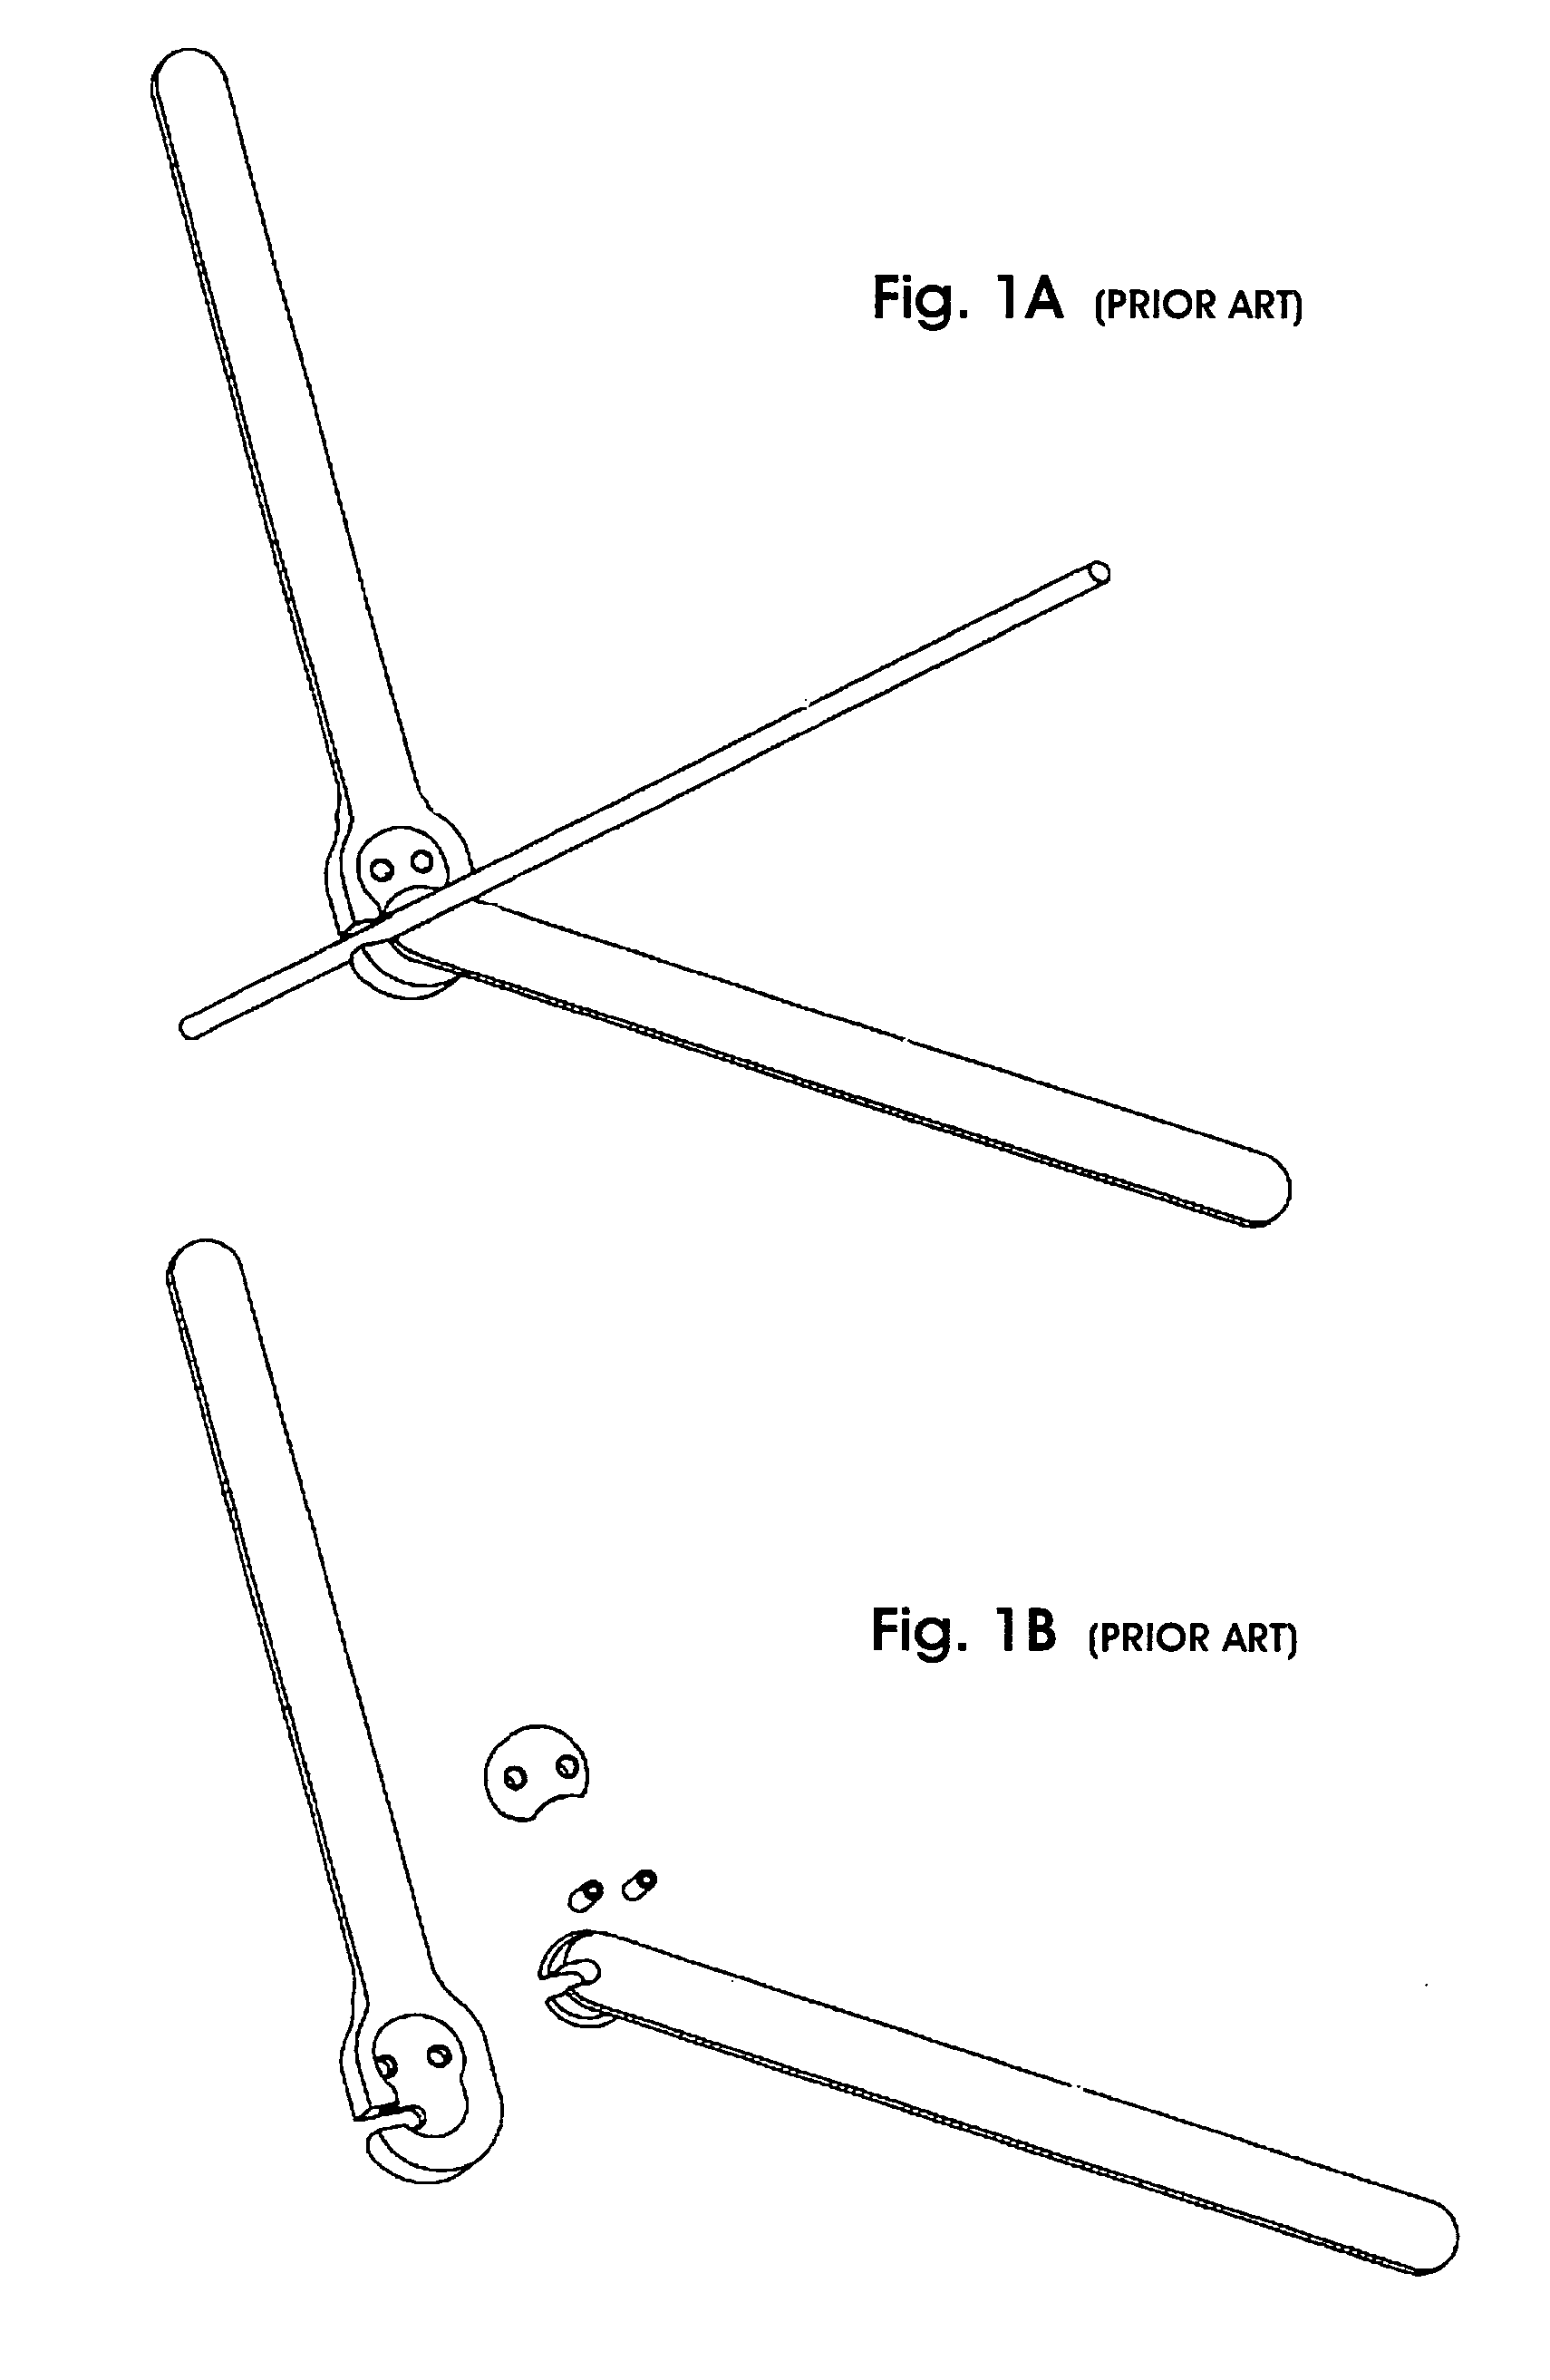 Two-stage attachment for cutting, crimping etc, and mechanical method thereof